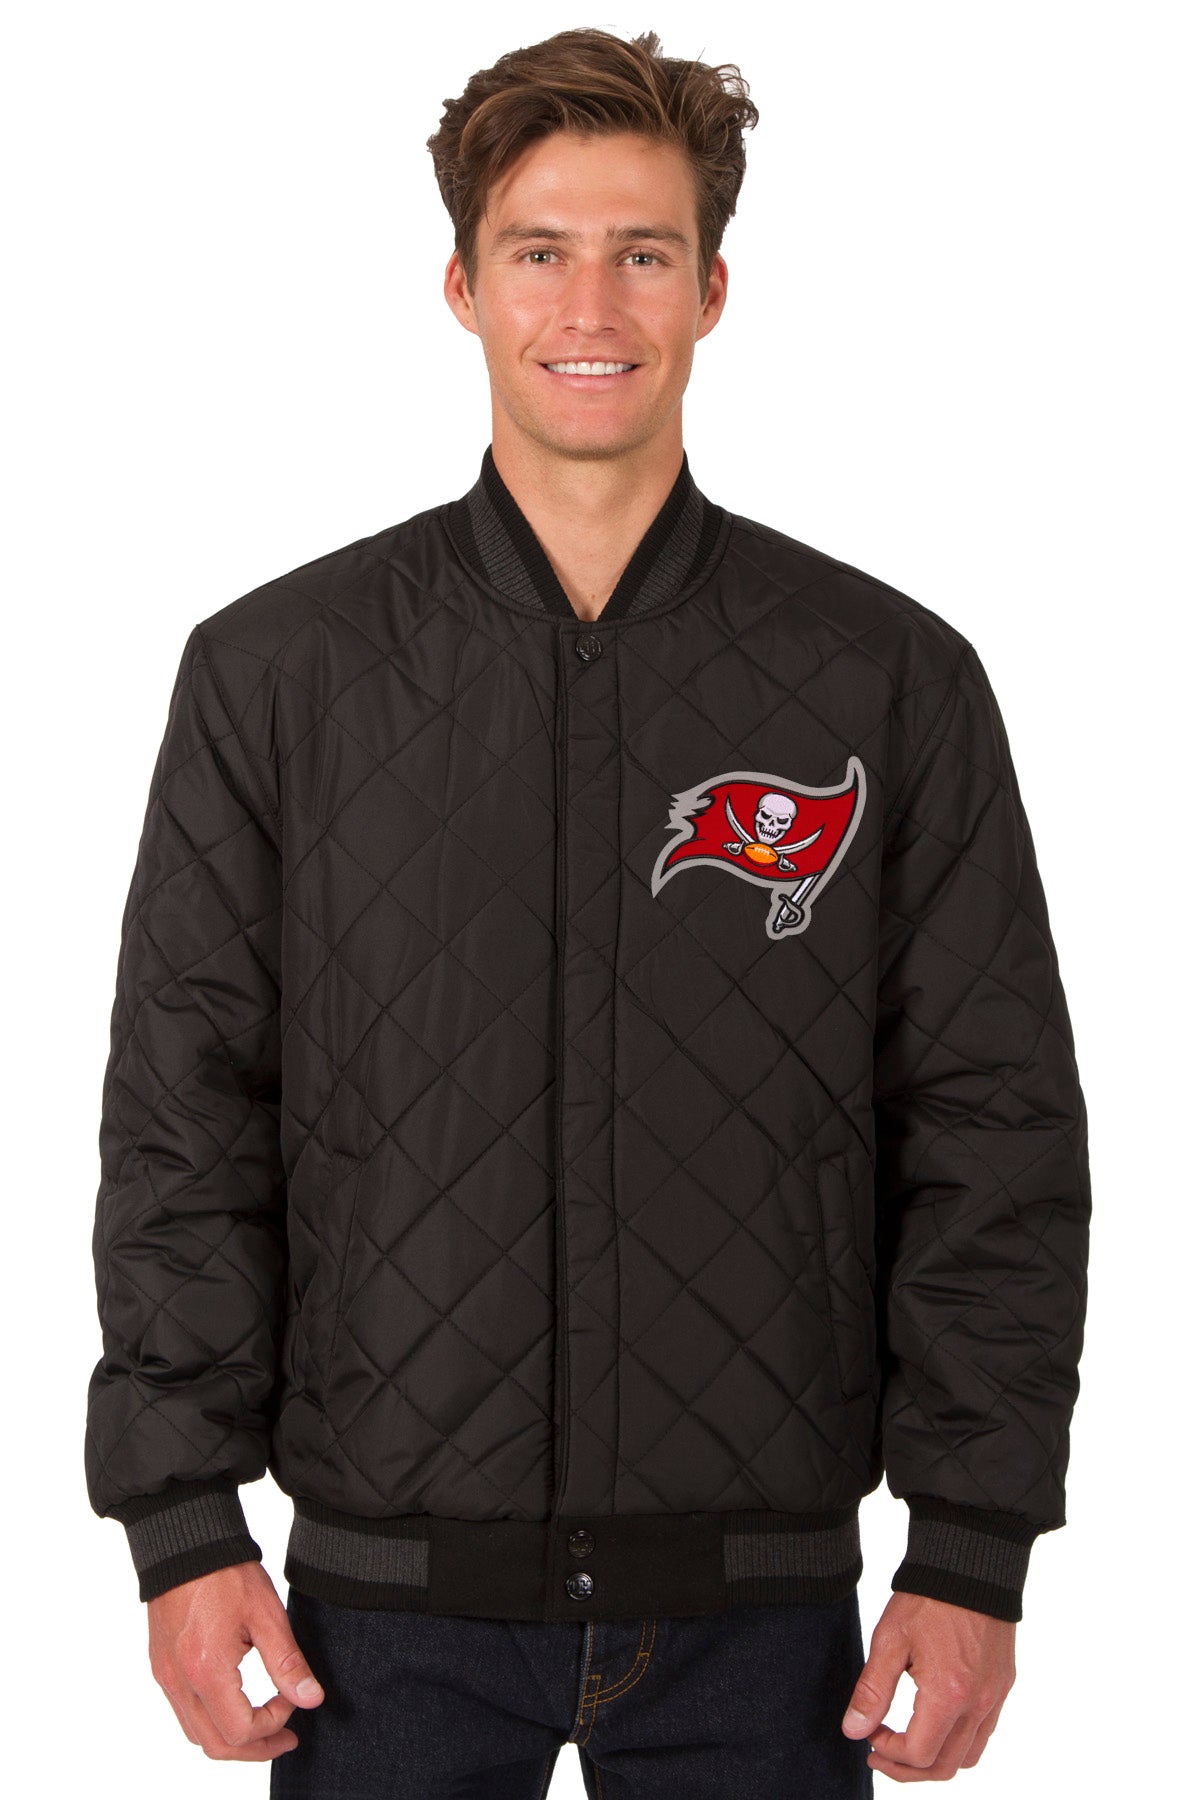 Tampa Bay Buccaneers Reversible Wool and Leather Jacket